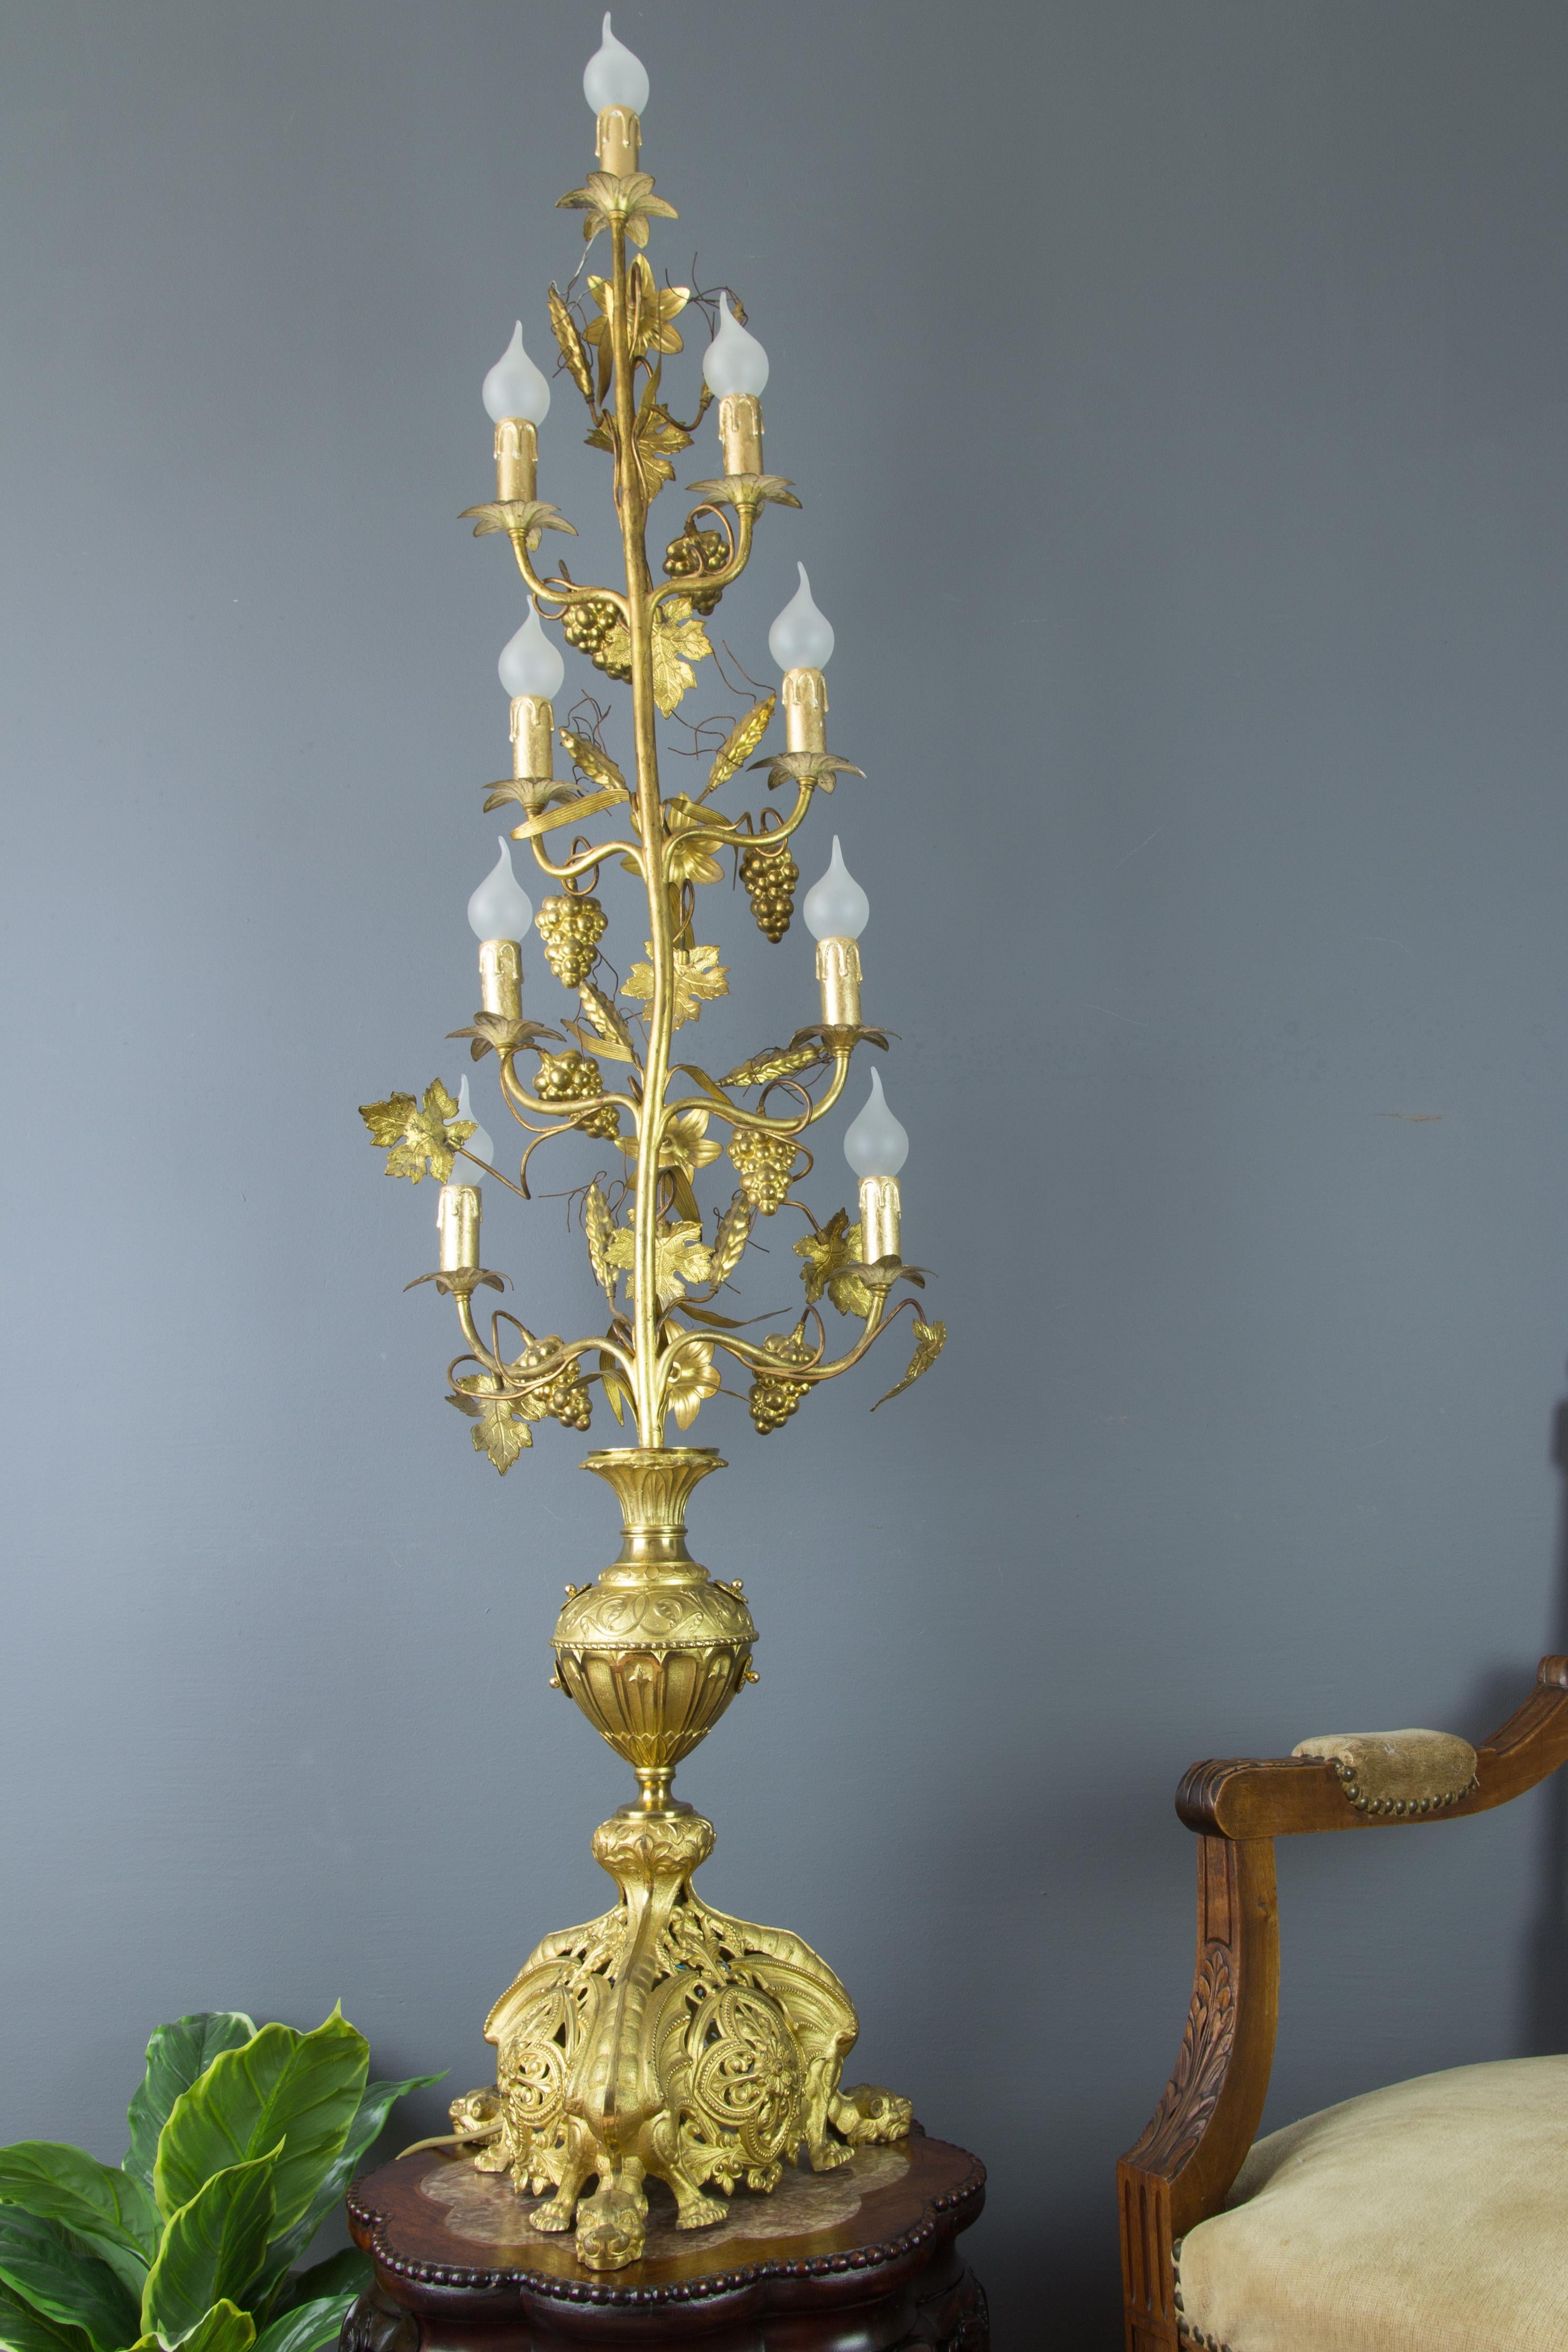 20th Century Gilt Brass and Bronze Nine-Light Electrified French Candelabra, Floor Lamp For Sale